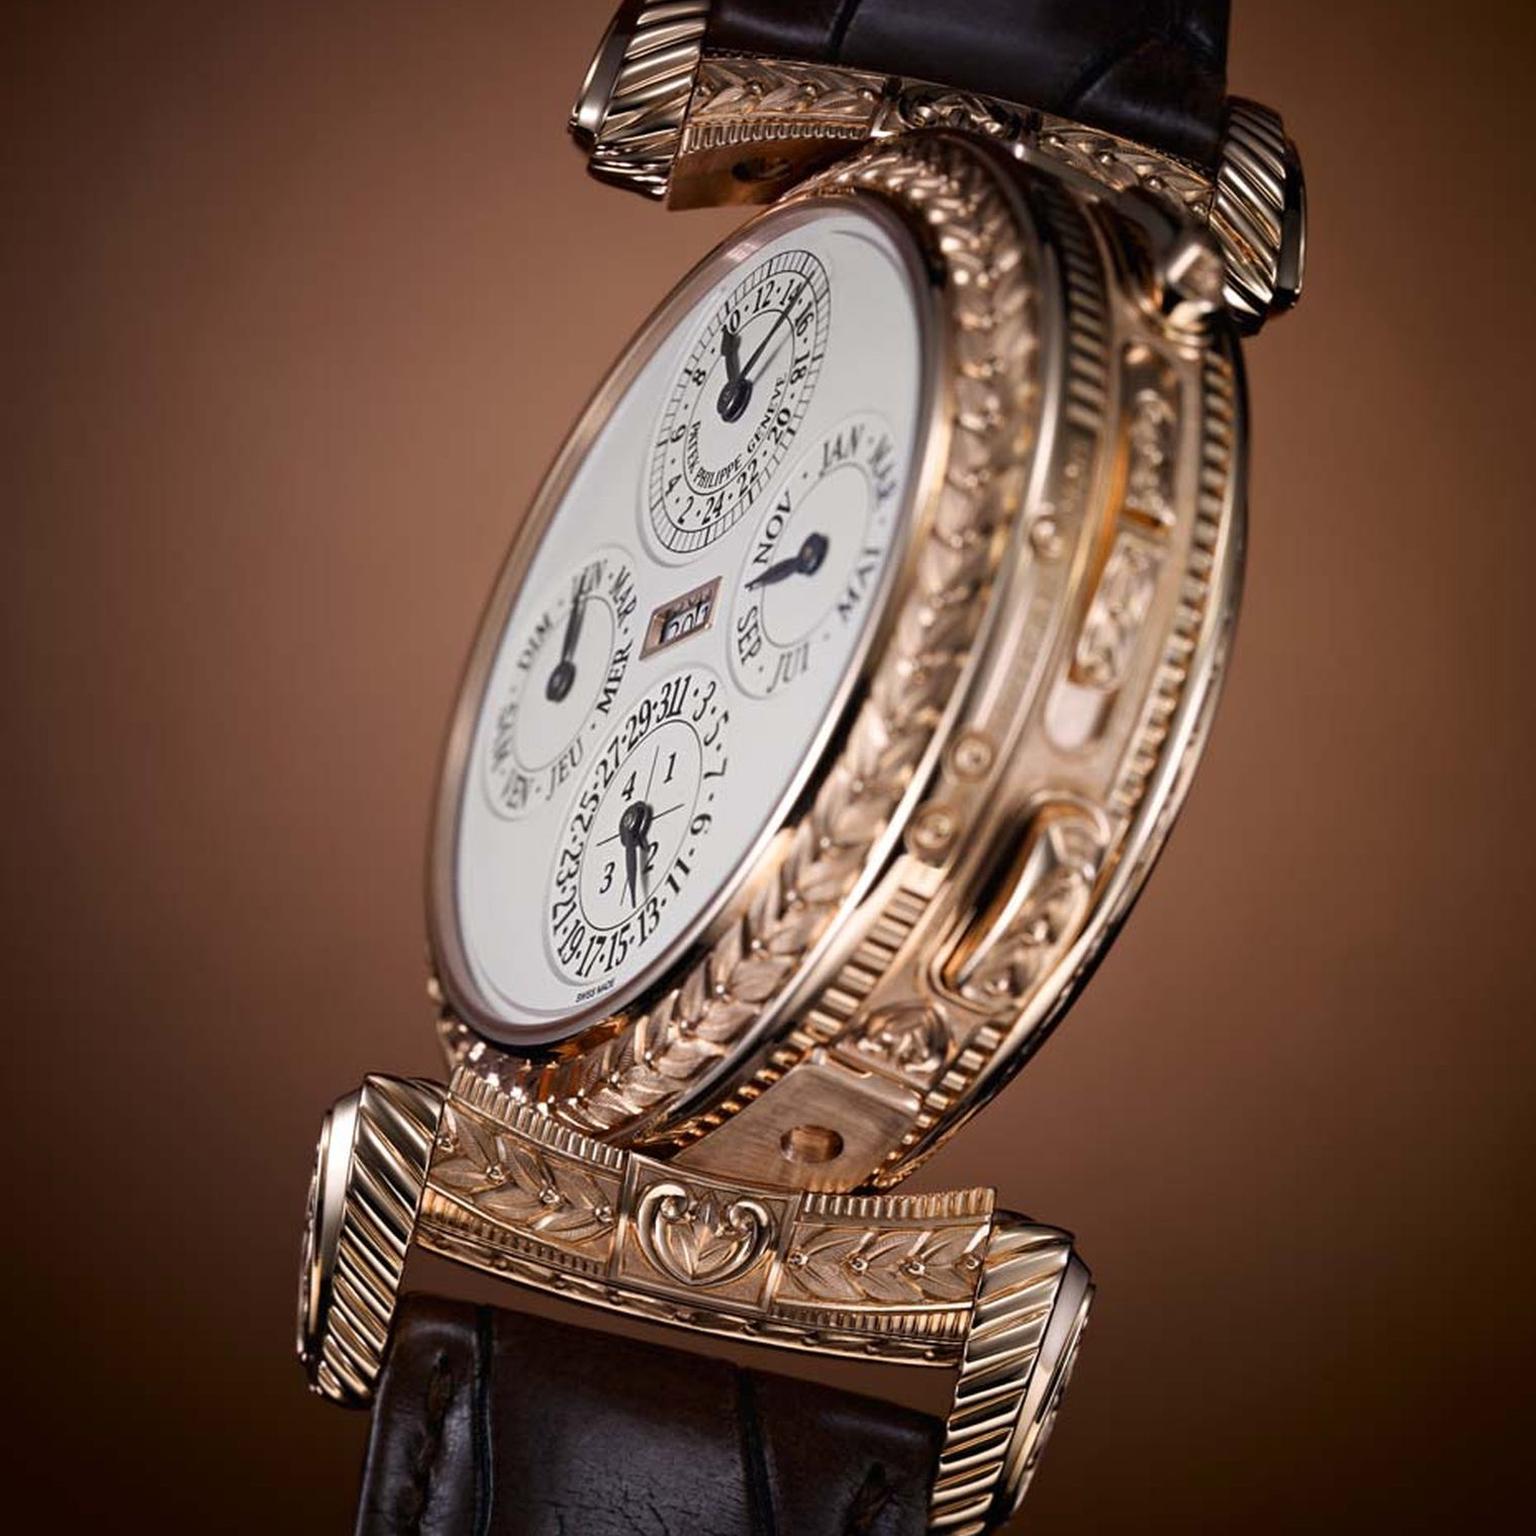 A grand total of 1,366 parts were used to create the 175th anniversary Patek Philippe Grandmaster Chime Ref. 5175 watch - the most complicated Patek Philippe wristwatch has ever created.